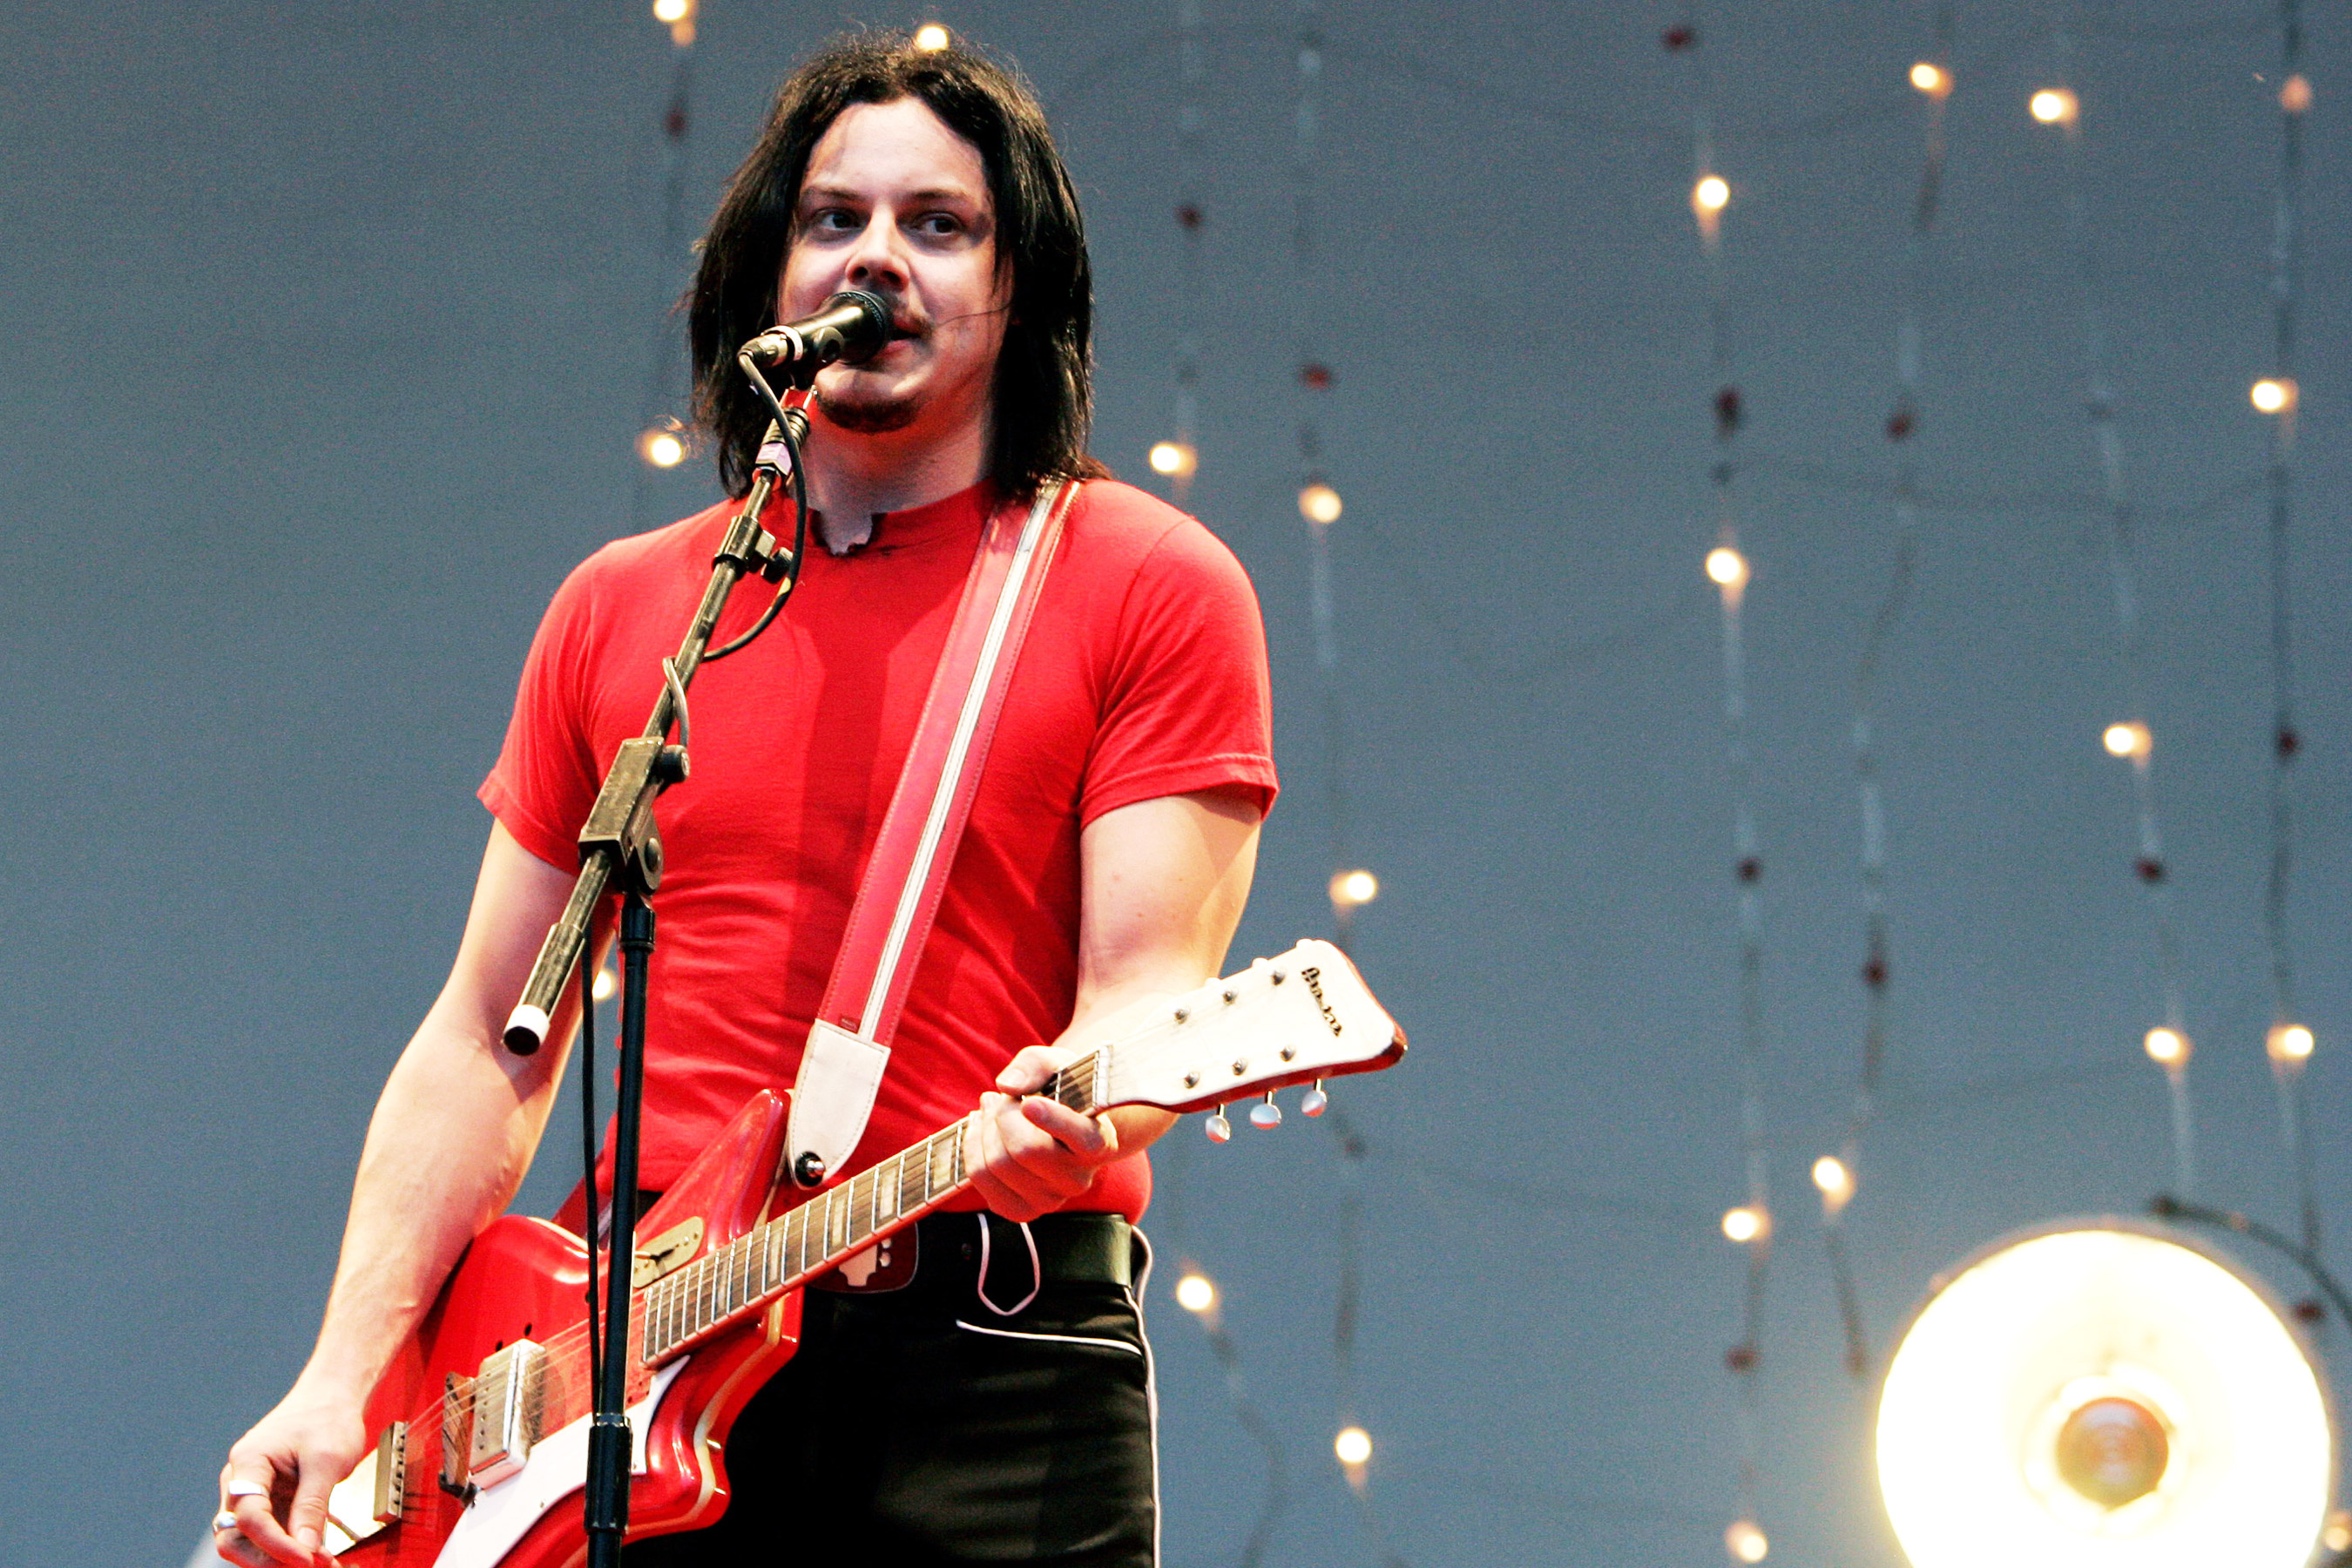 Jack White, Singing Blondie's One Way or Another, Rare cassette, Rolling Stone, 2700x1800 HD Desktop